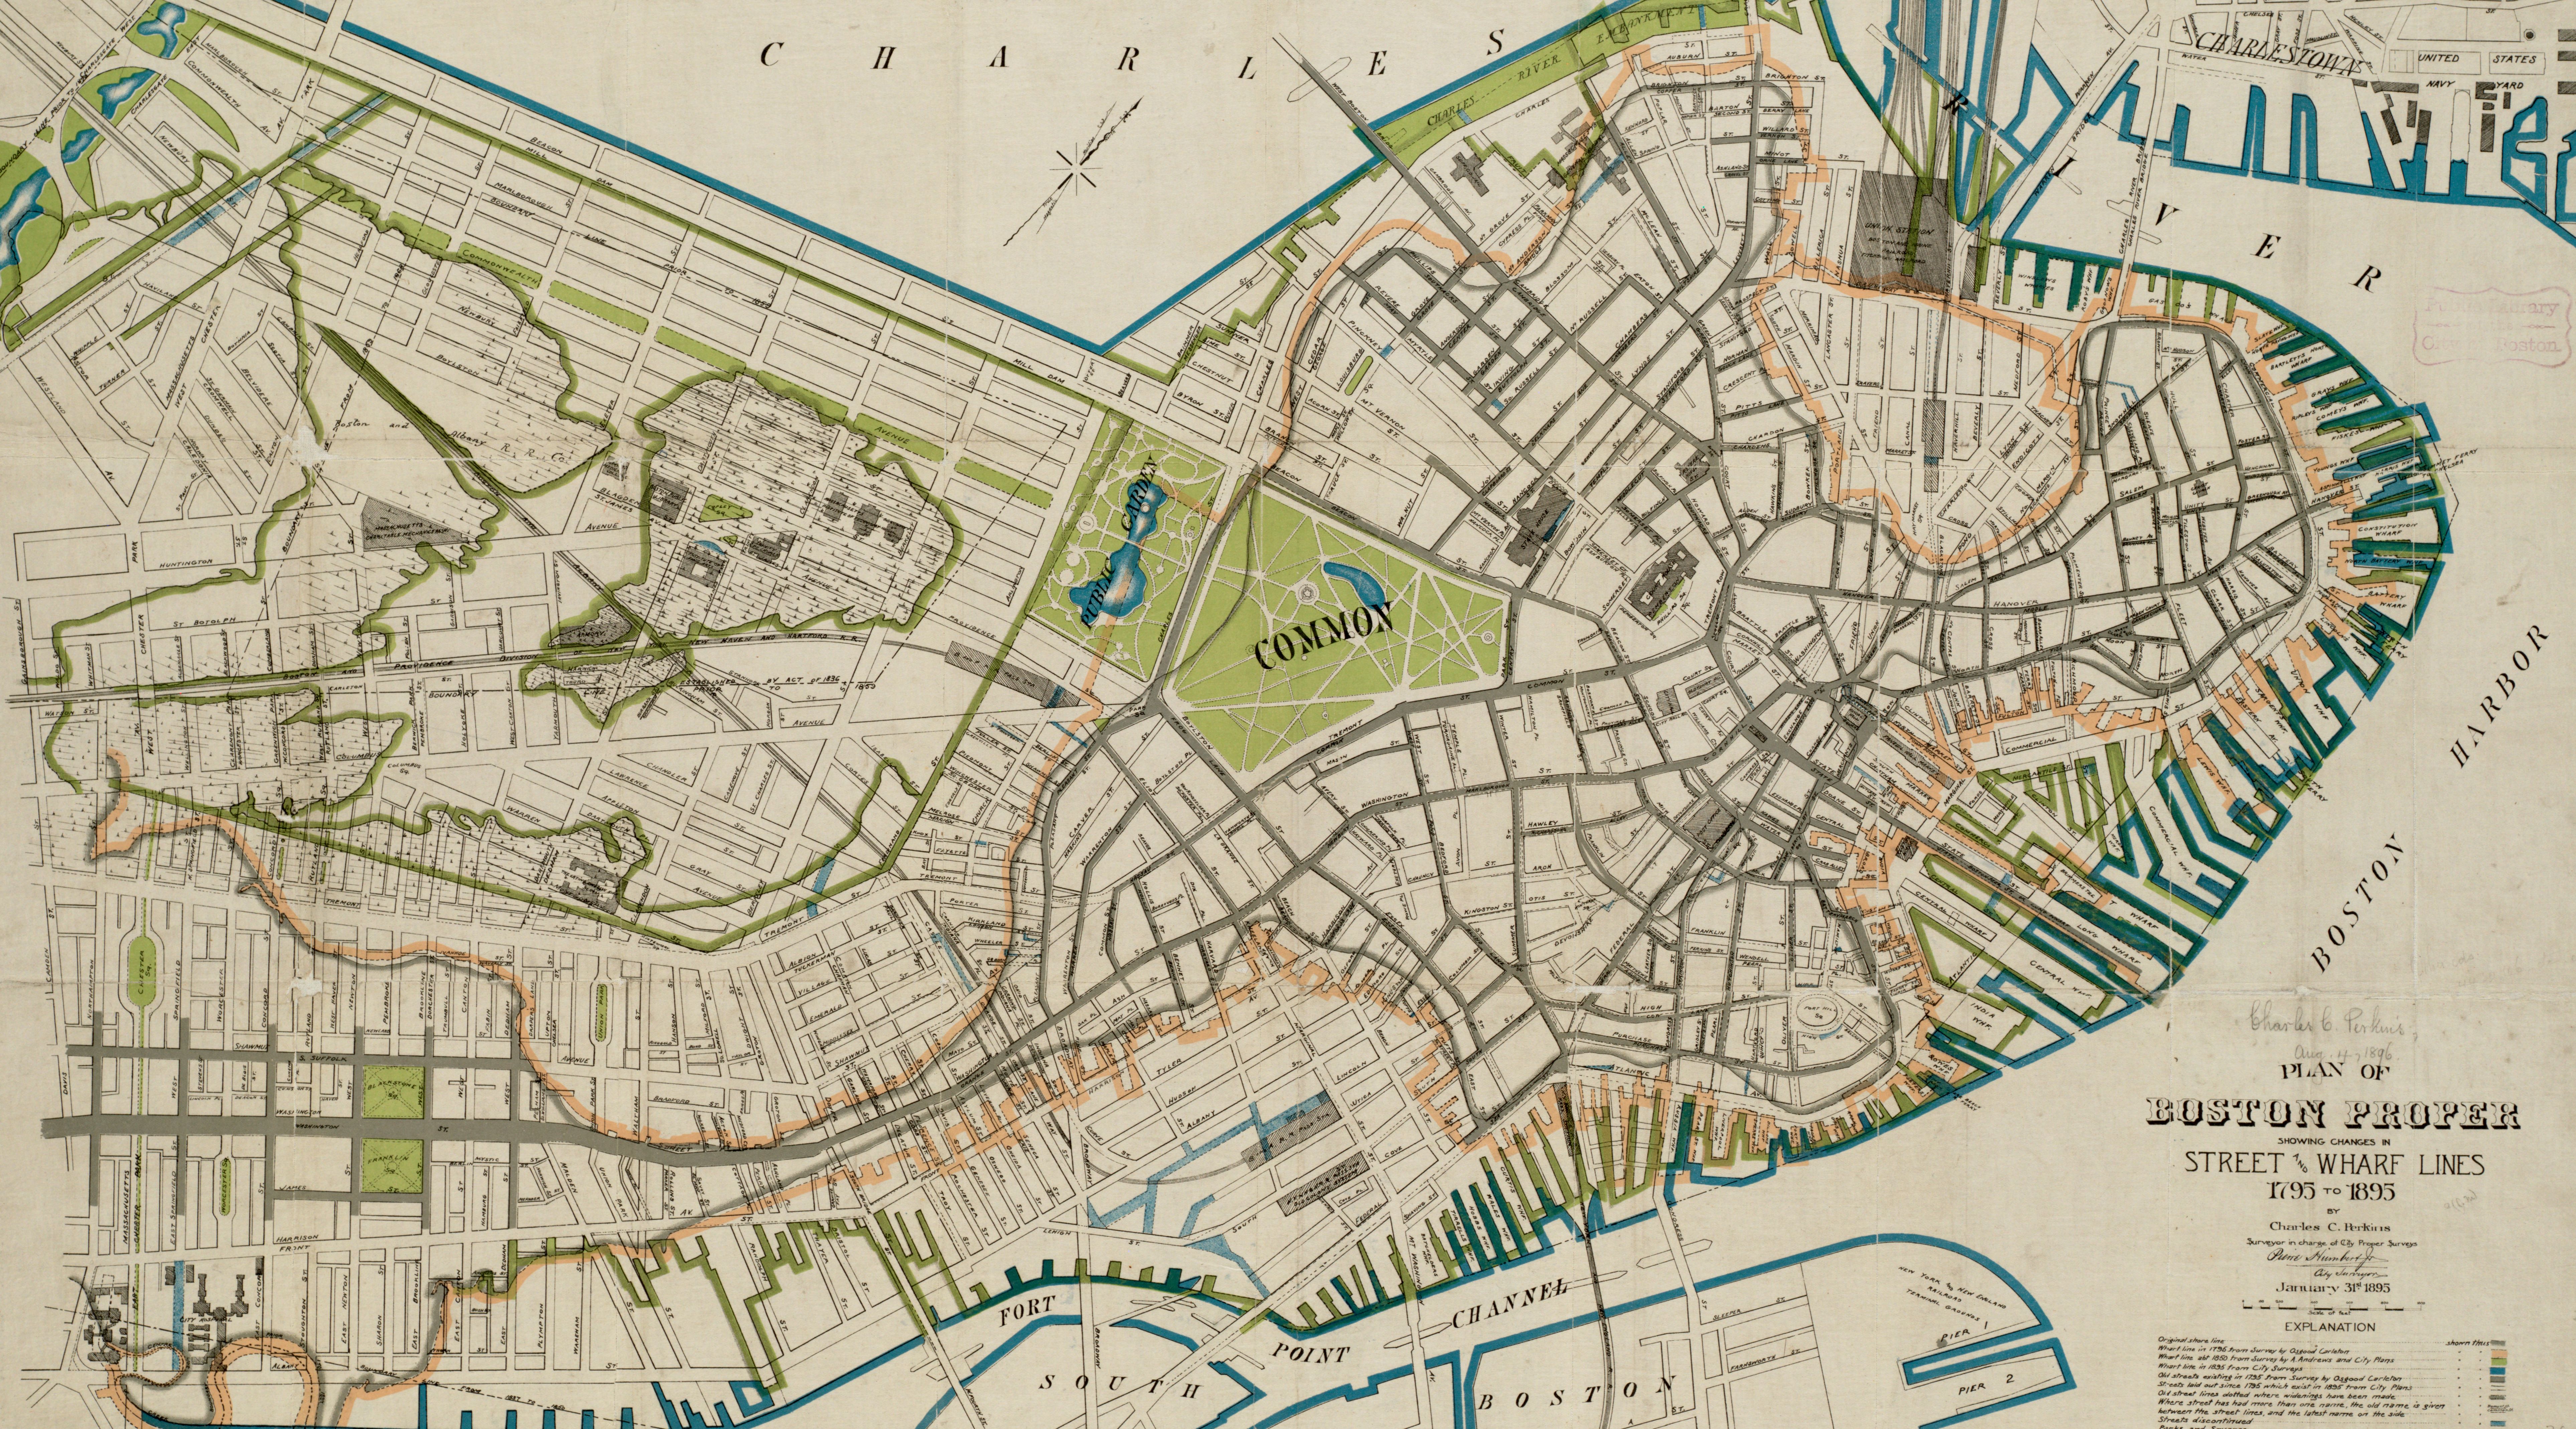 As one of the most important centers of a newly independent nation, Boston spent the first half of the nineteenth century reimagining its urban form and building neighborhoods from scratch, as seen in this 1895 map.